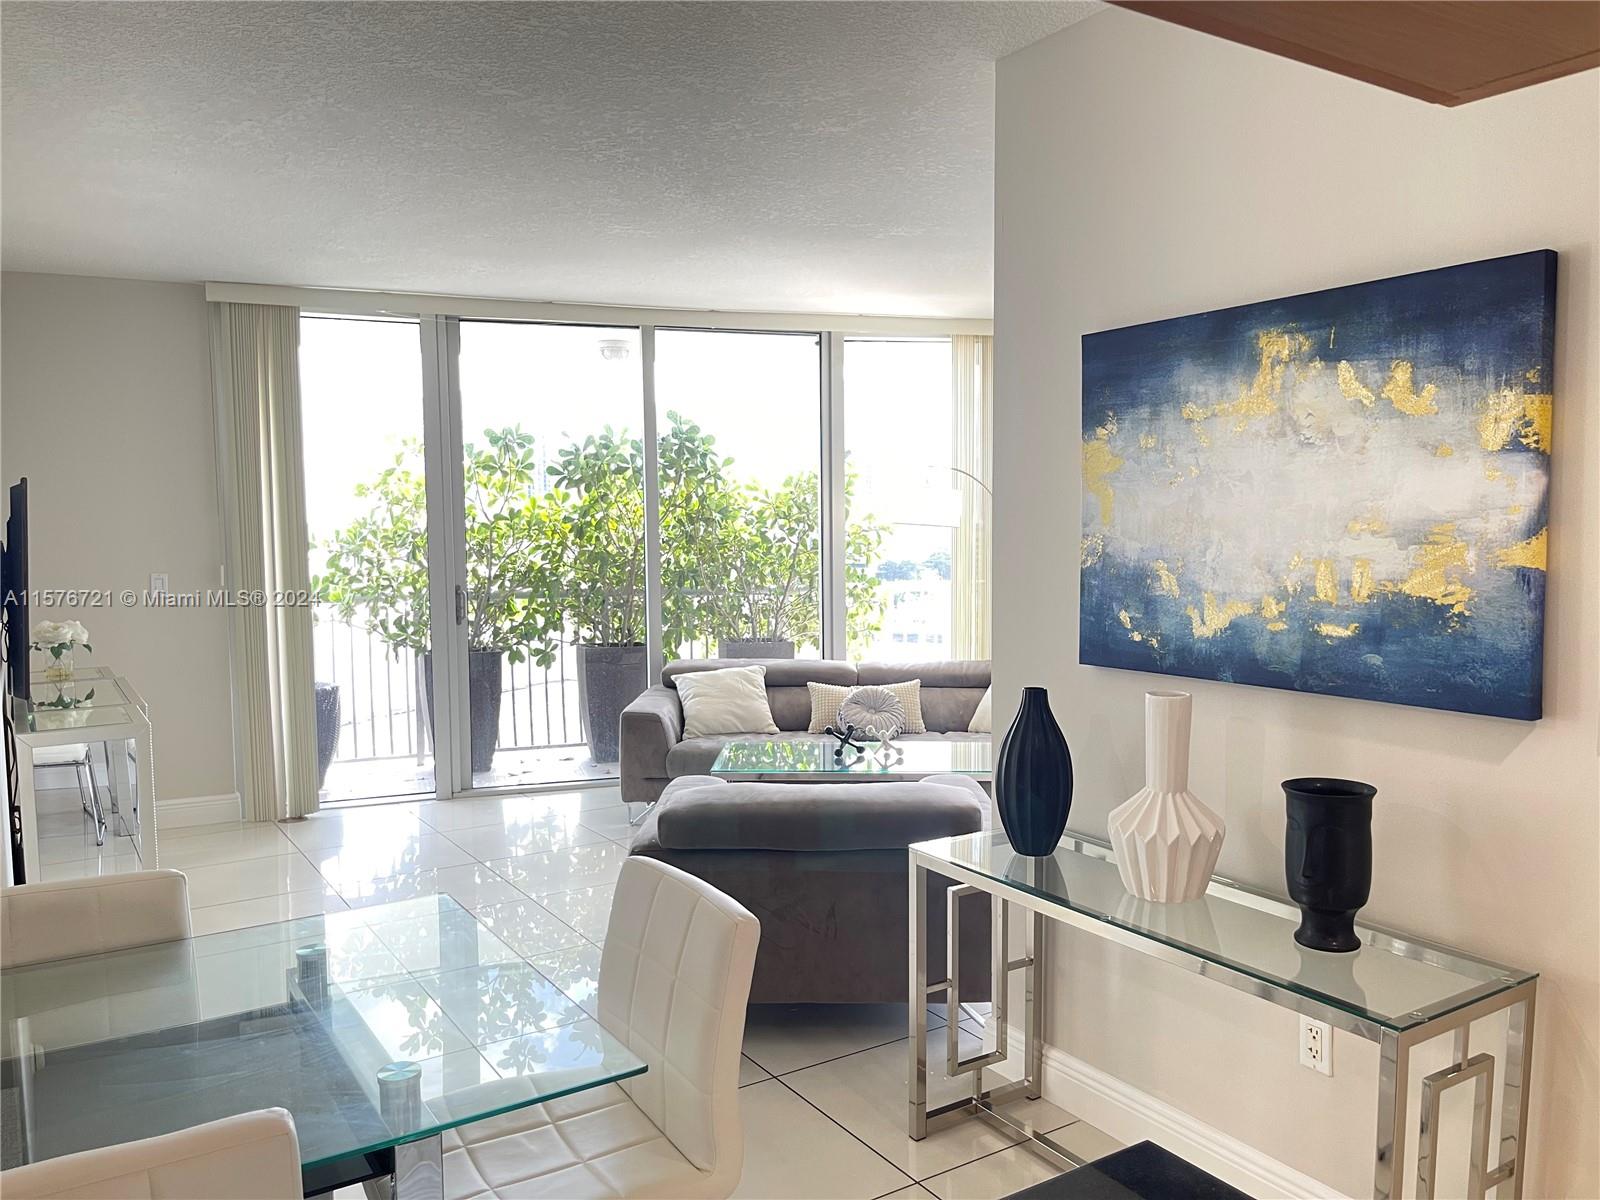 Beautiful fully furnished 2 bedroom, 2 bathroom unit located at the Iconic Resort-style Opera Tower, in the heart of Miami's most vibrant neighborhood, Edgewater, bordered by Biscayne Bay. This unit features an open eat in kitchen, stainless steel appliances, granite countertops, impact doors and windows, spacious master with walk in closet, and a washer and dryer. Great amenities just recently renovated, swimming pool, new state-of-the-art fitness center, and social events room. Cable and Wi-Fi included on maintenance. Close to Downtown, Wynwood, Design District, Midtown, and Miami Beach. *** 30 Day rentals are allowed. GREAT FOR INVESTORS!